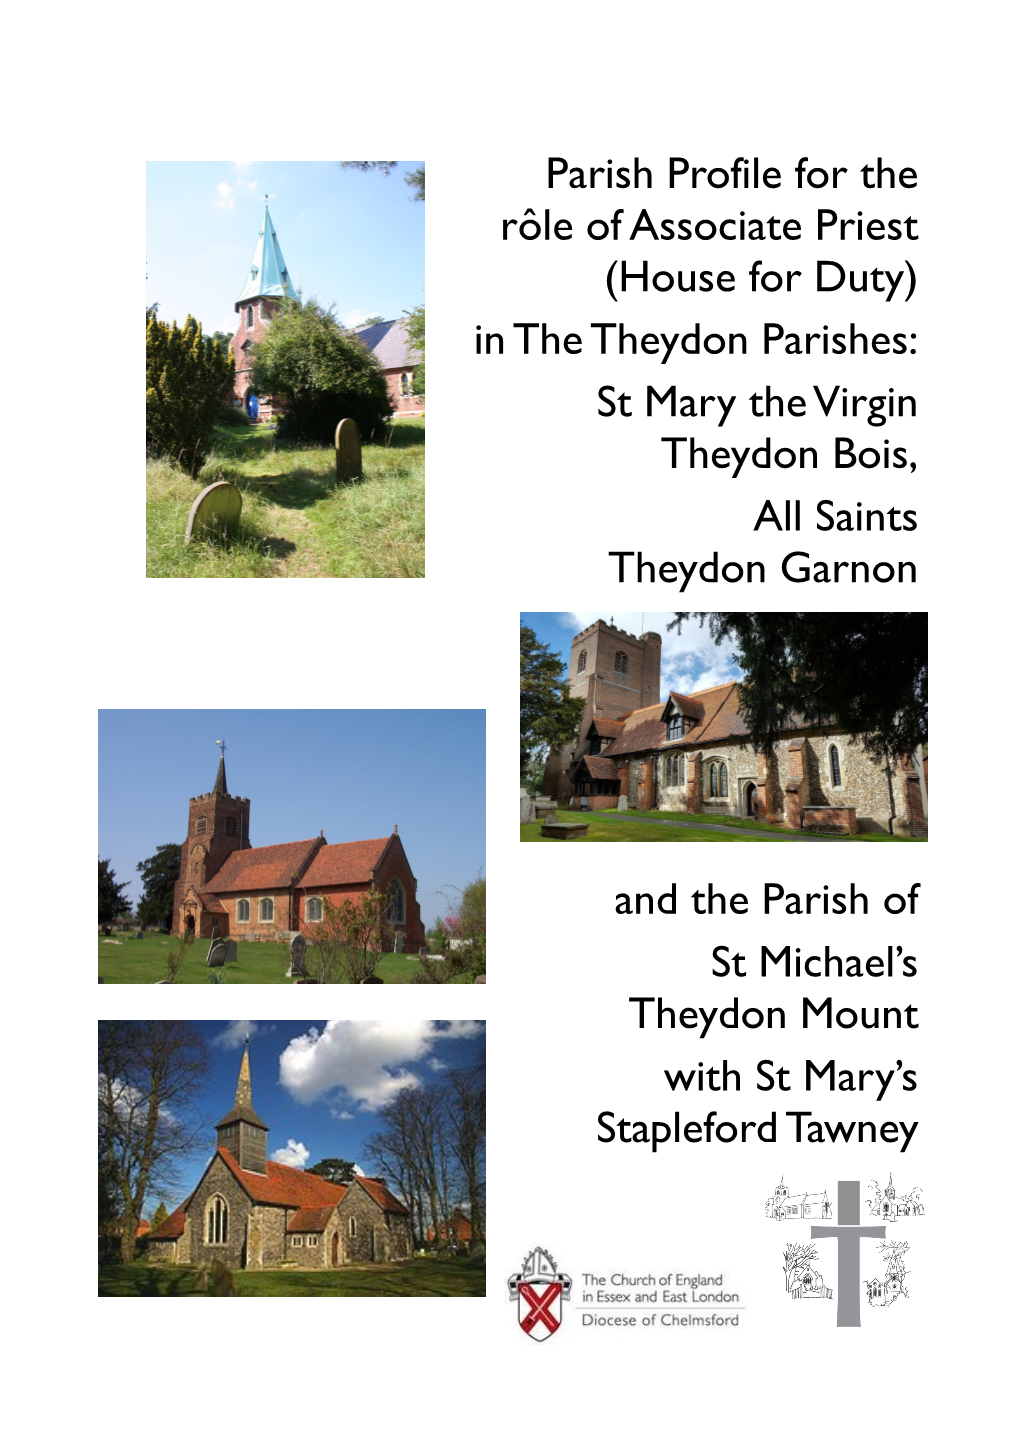 In the Theydon Parishes